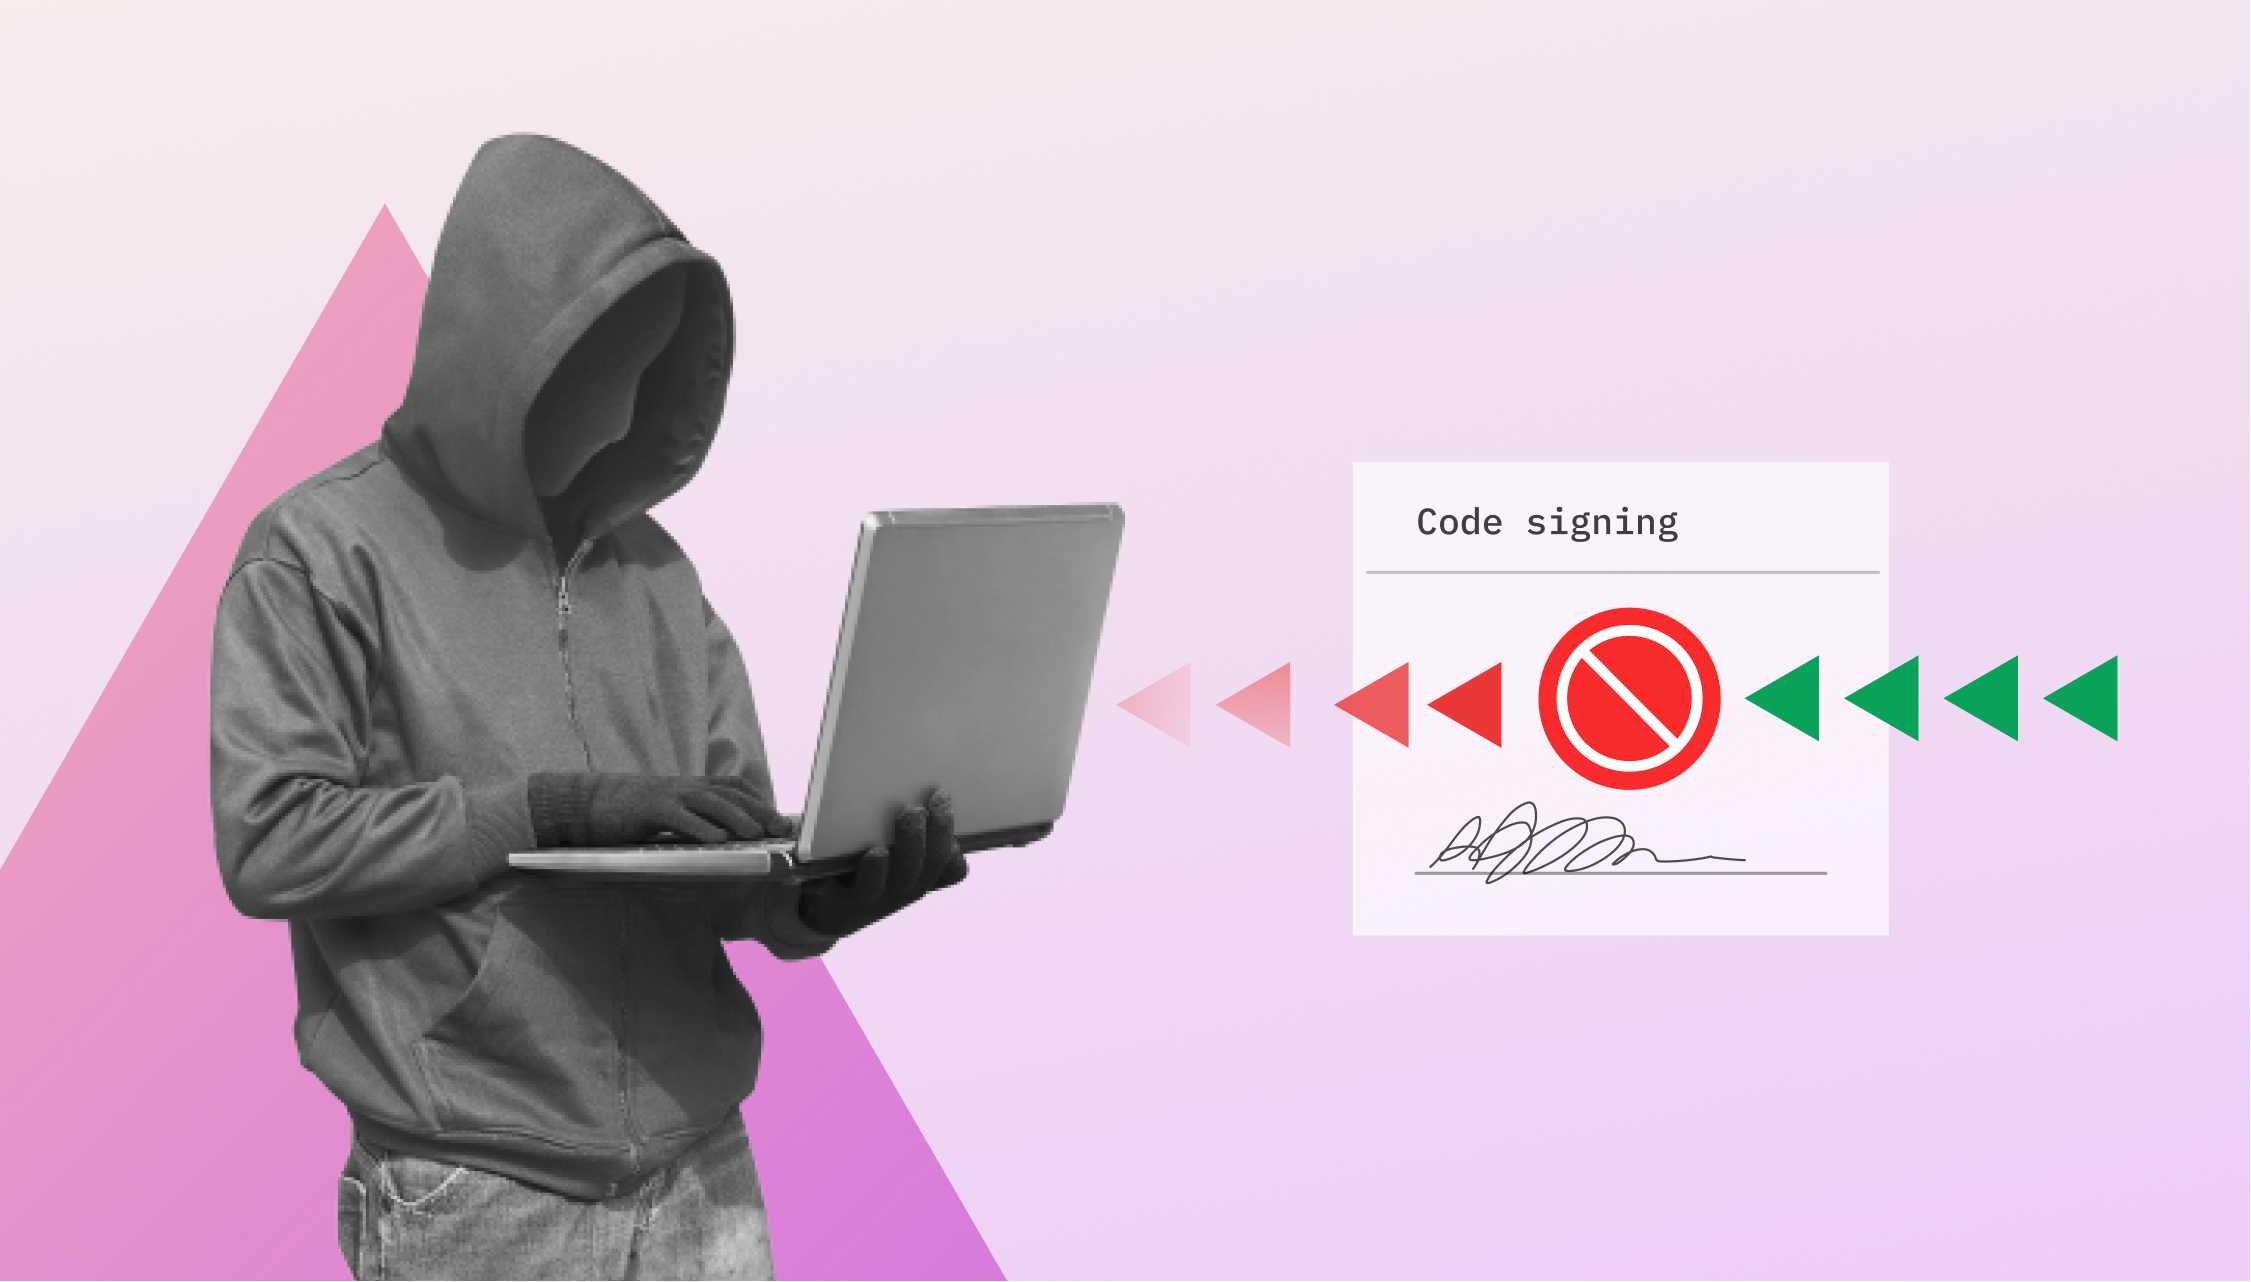 Man with laptop showing how code signing works. On the right is a certificate